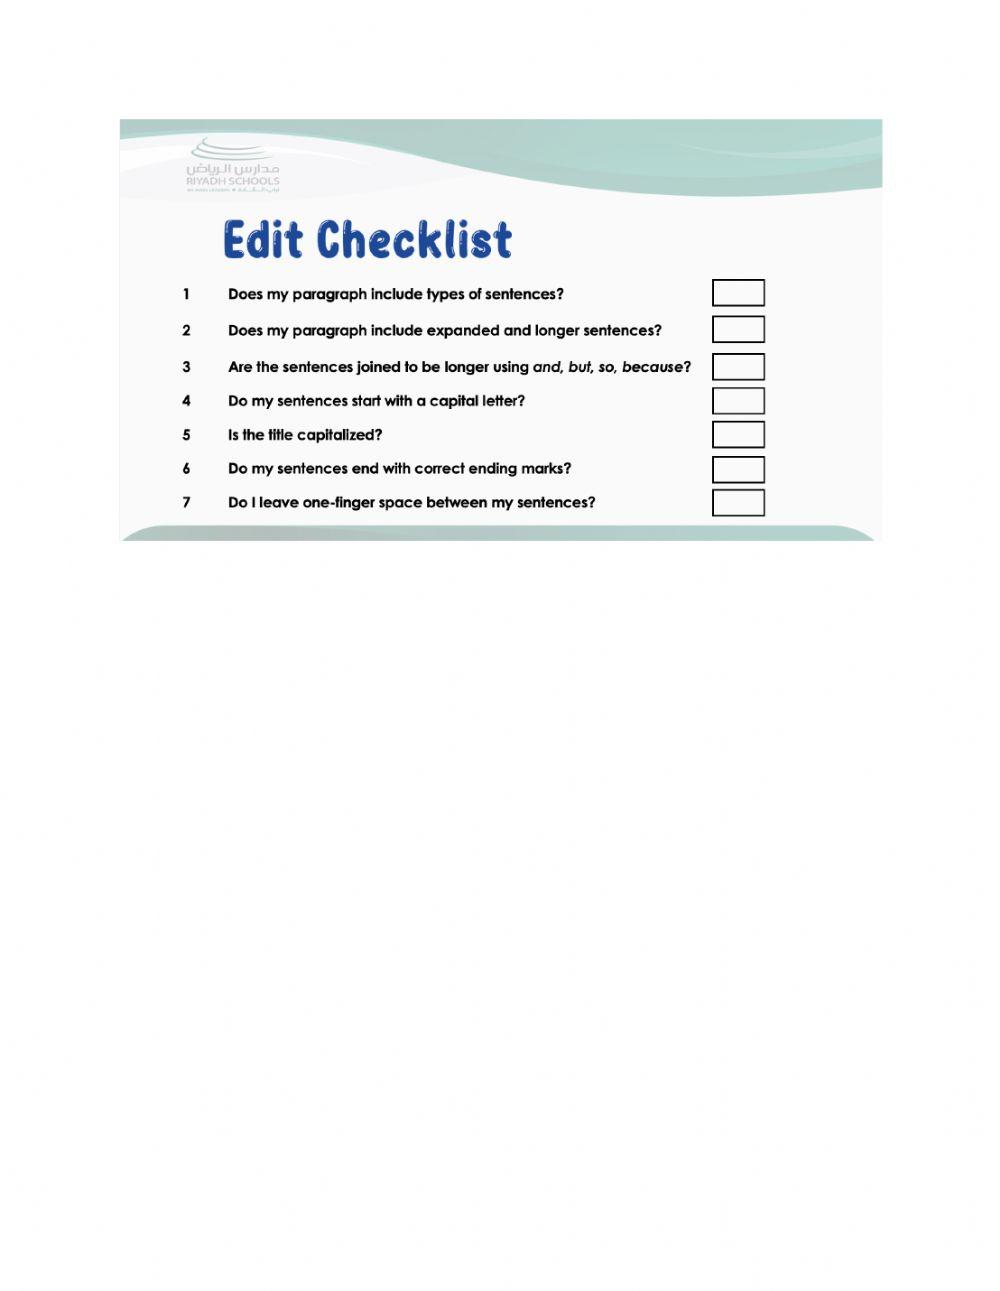 Editing Checklist (Expository Text)